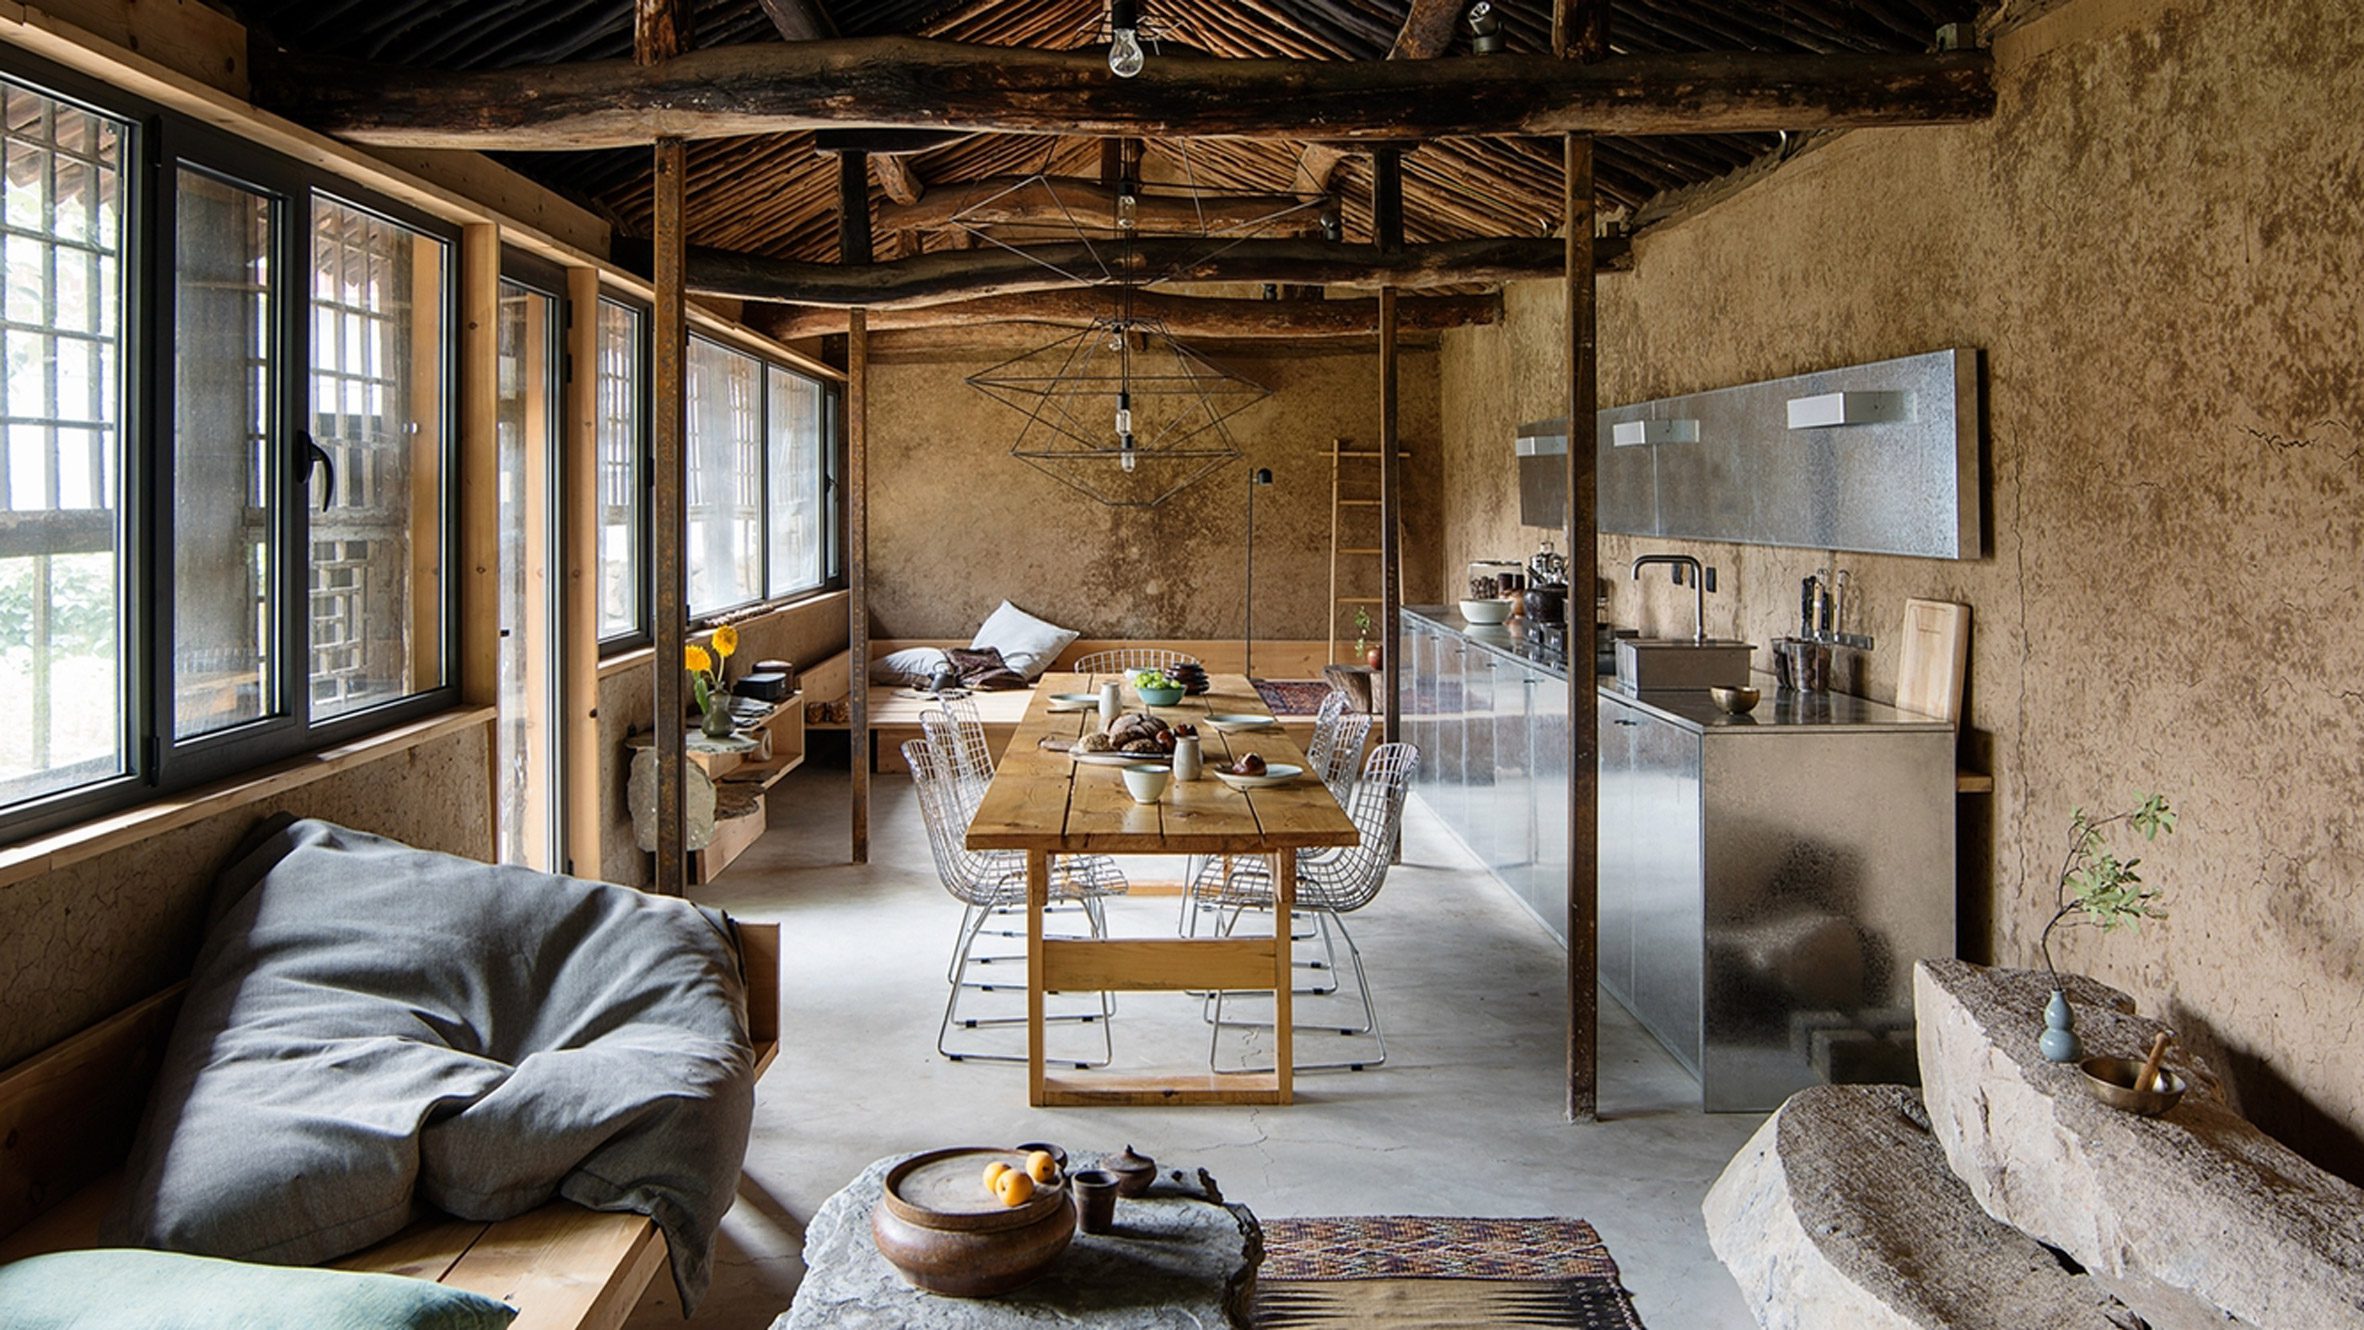 Ten rustic interiors that incorporate natural textures and materials